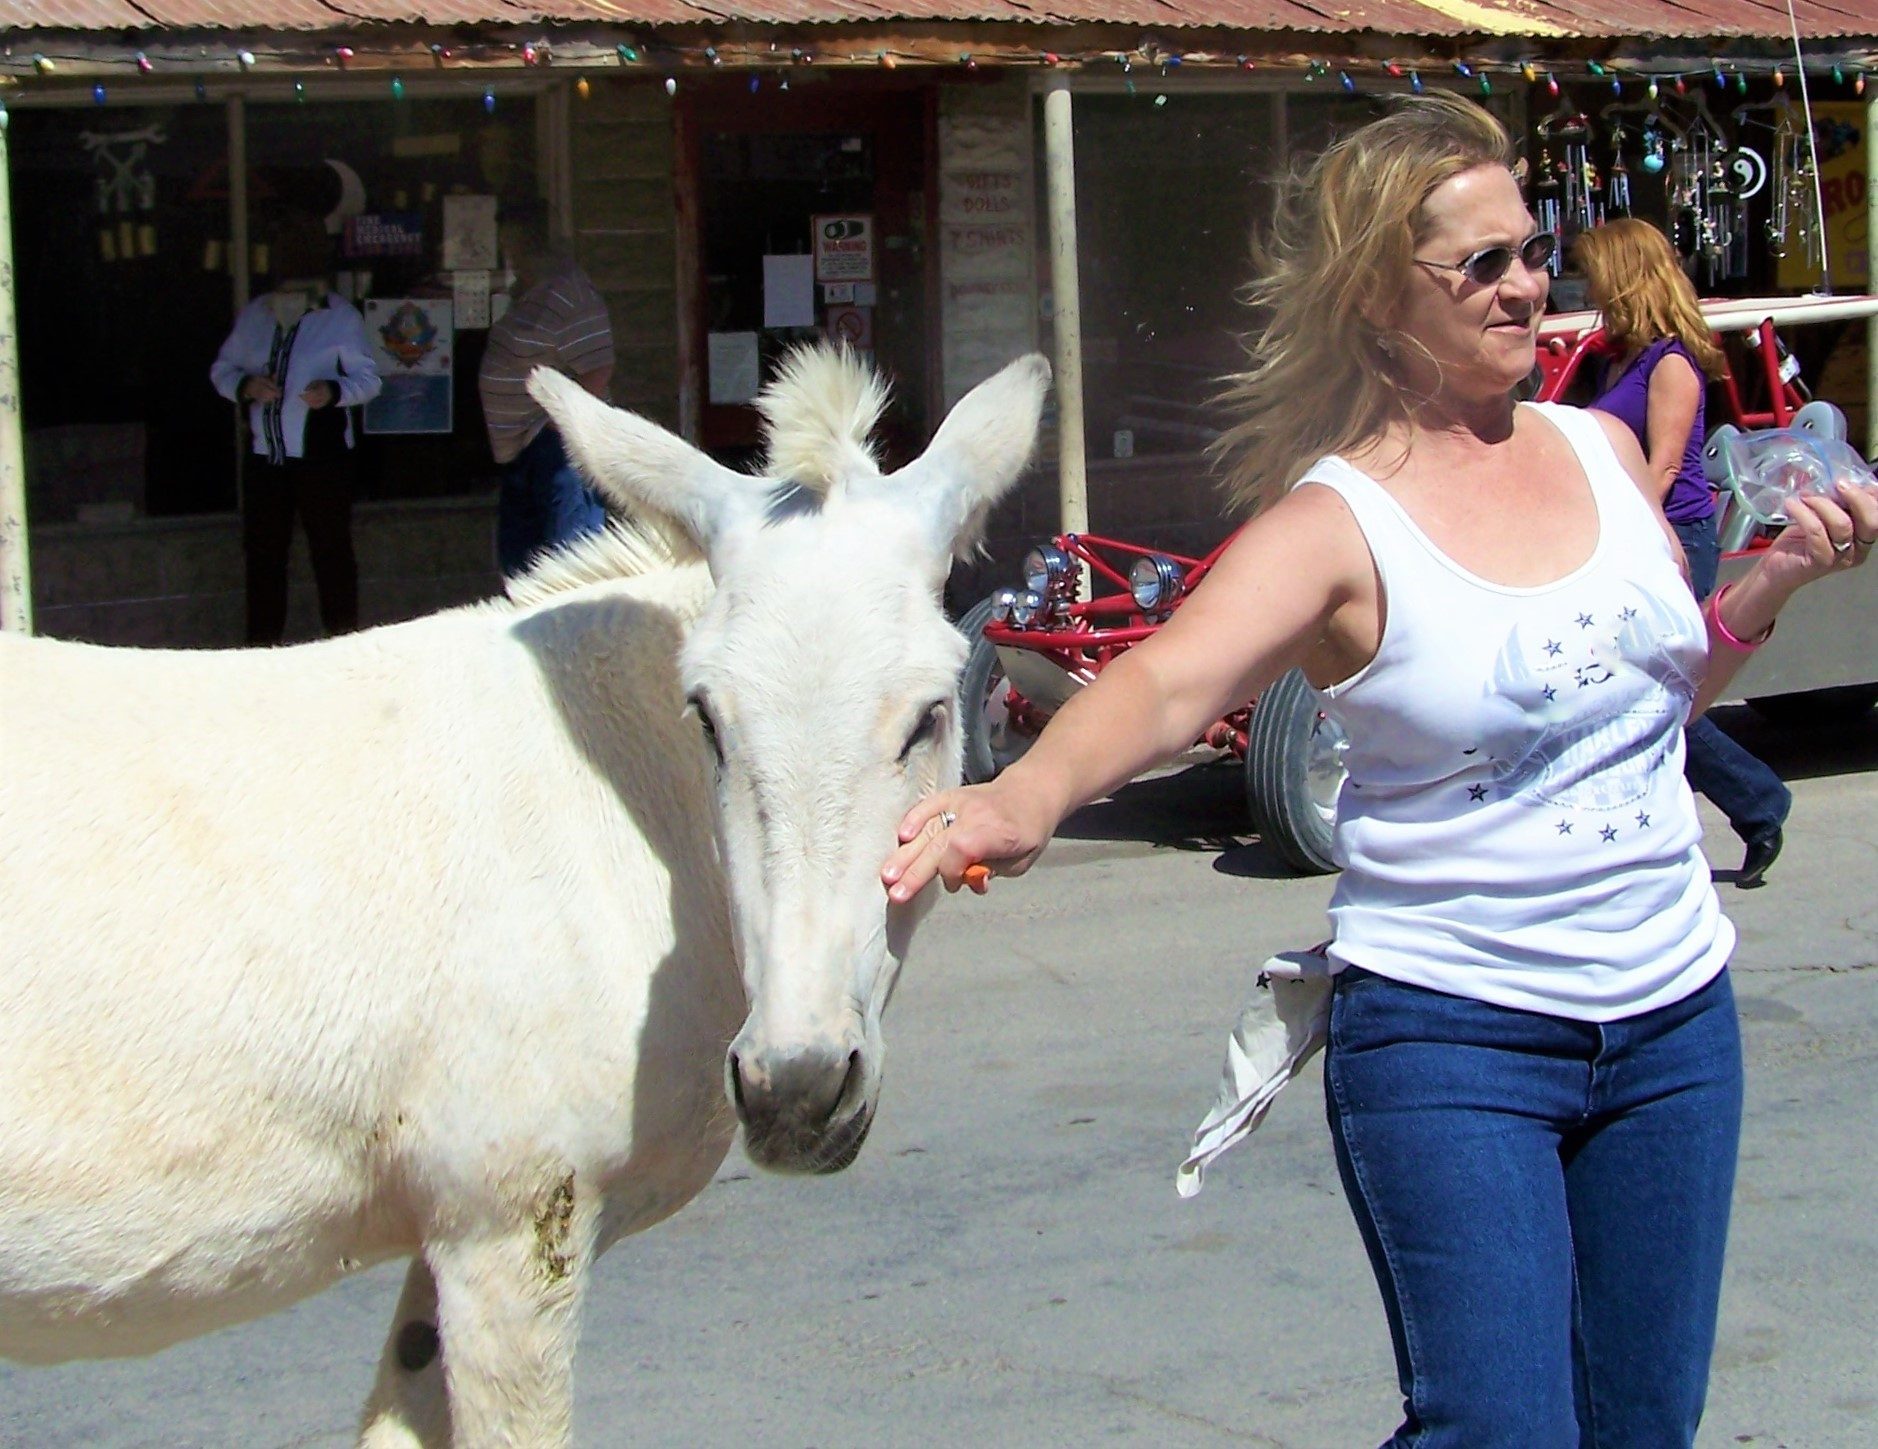 How to Spend a Day in Oatman, Arizona